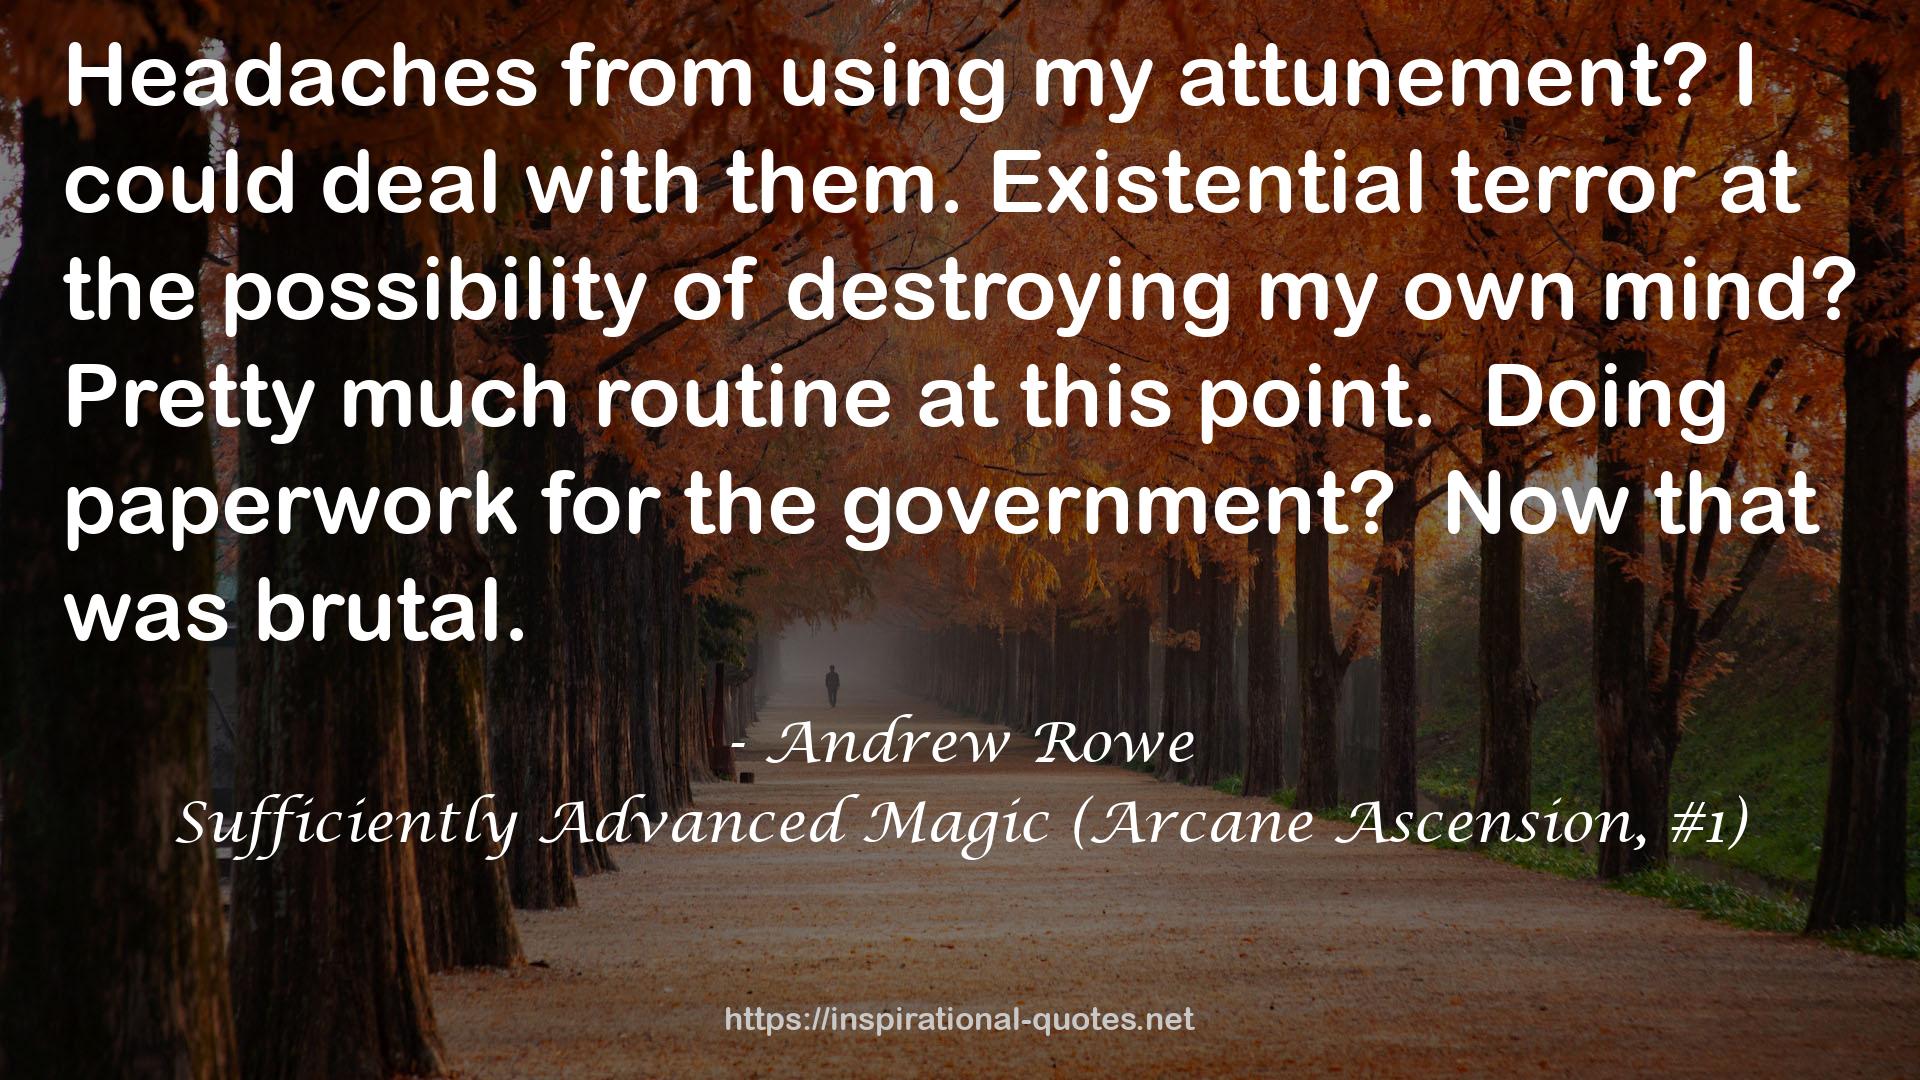 Sufficiently Advanced Magic (Arcane Ascension, #1) QUOTES